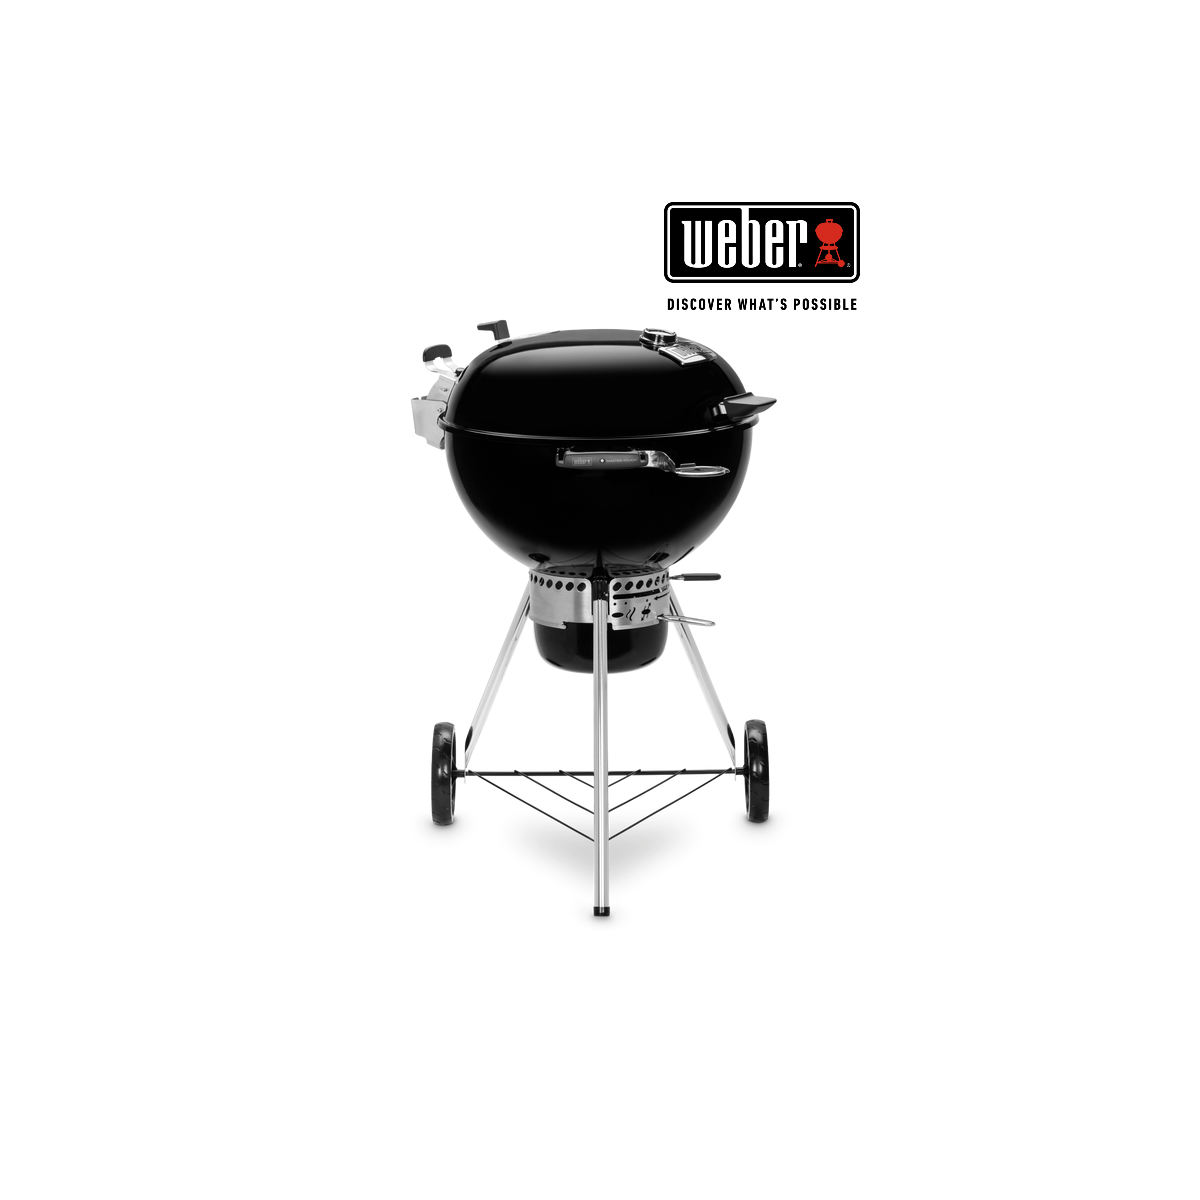 WEBER MASTER TOUCH PREMIUM E-5770 GBS 57 cm charcoal grill, 17301004